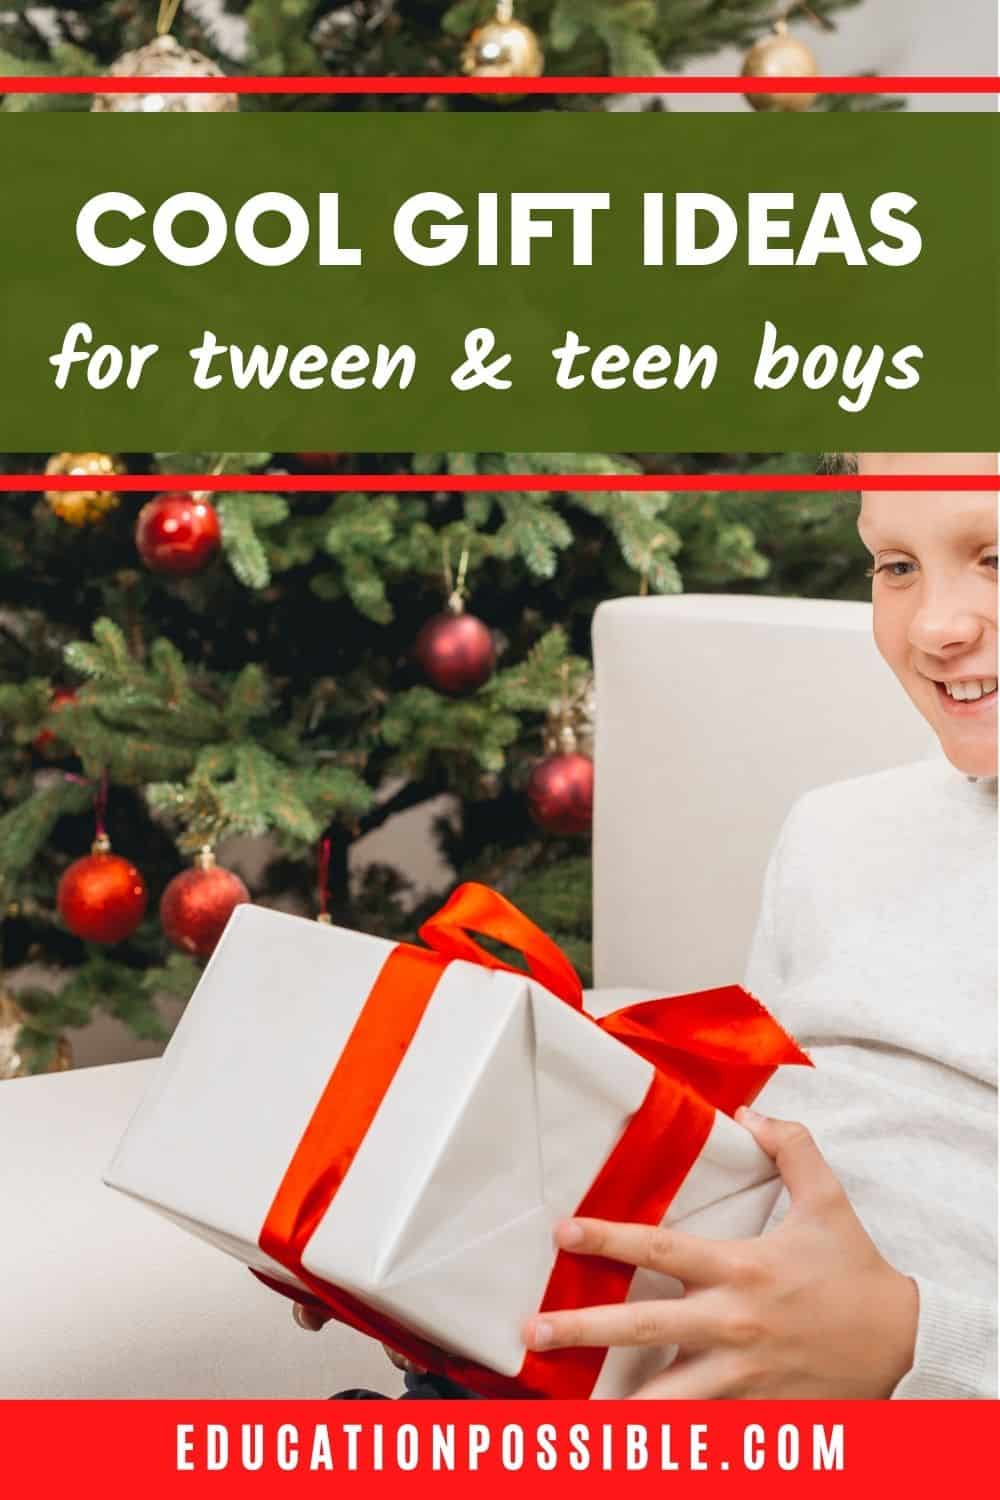 Tween boy sitting on a white couch next to a Christmas tree, holding a gift wrapped with white paper and red bow.